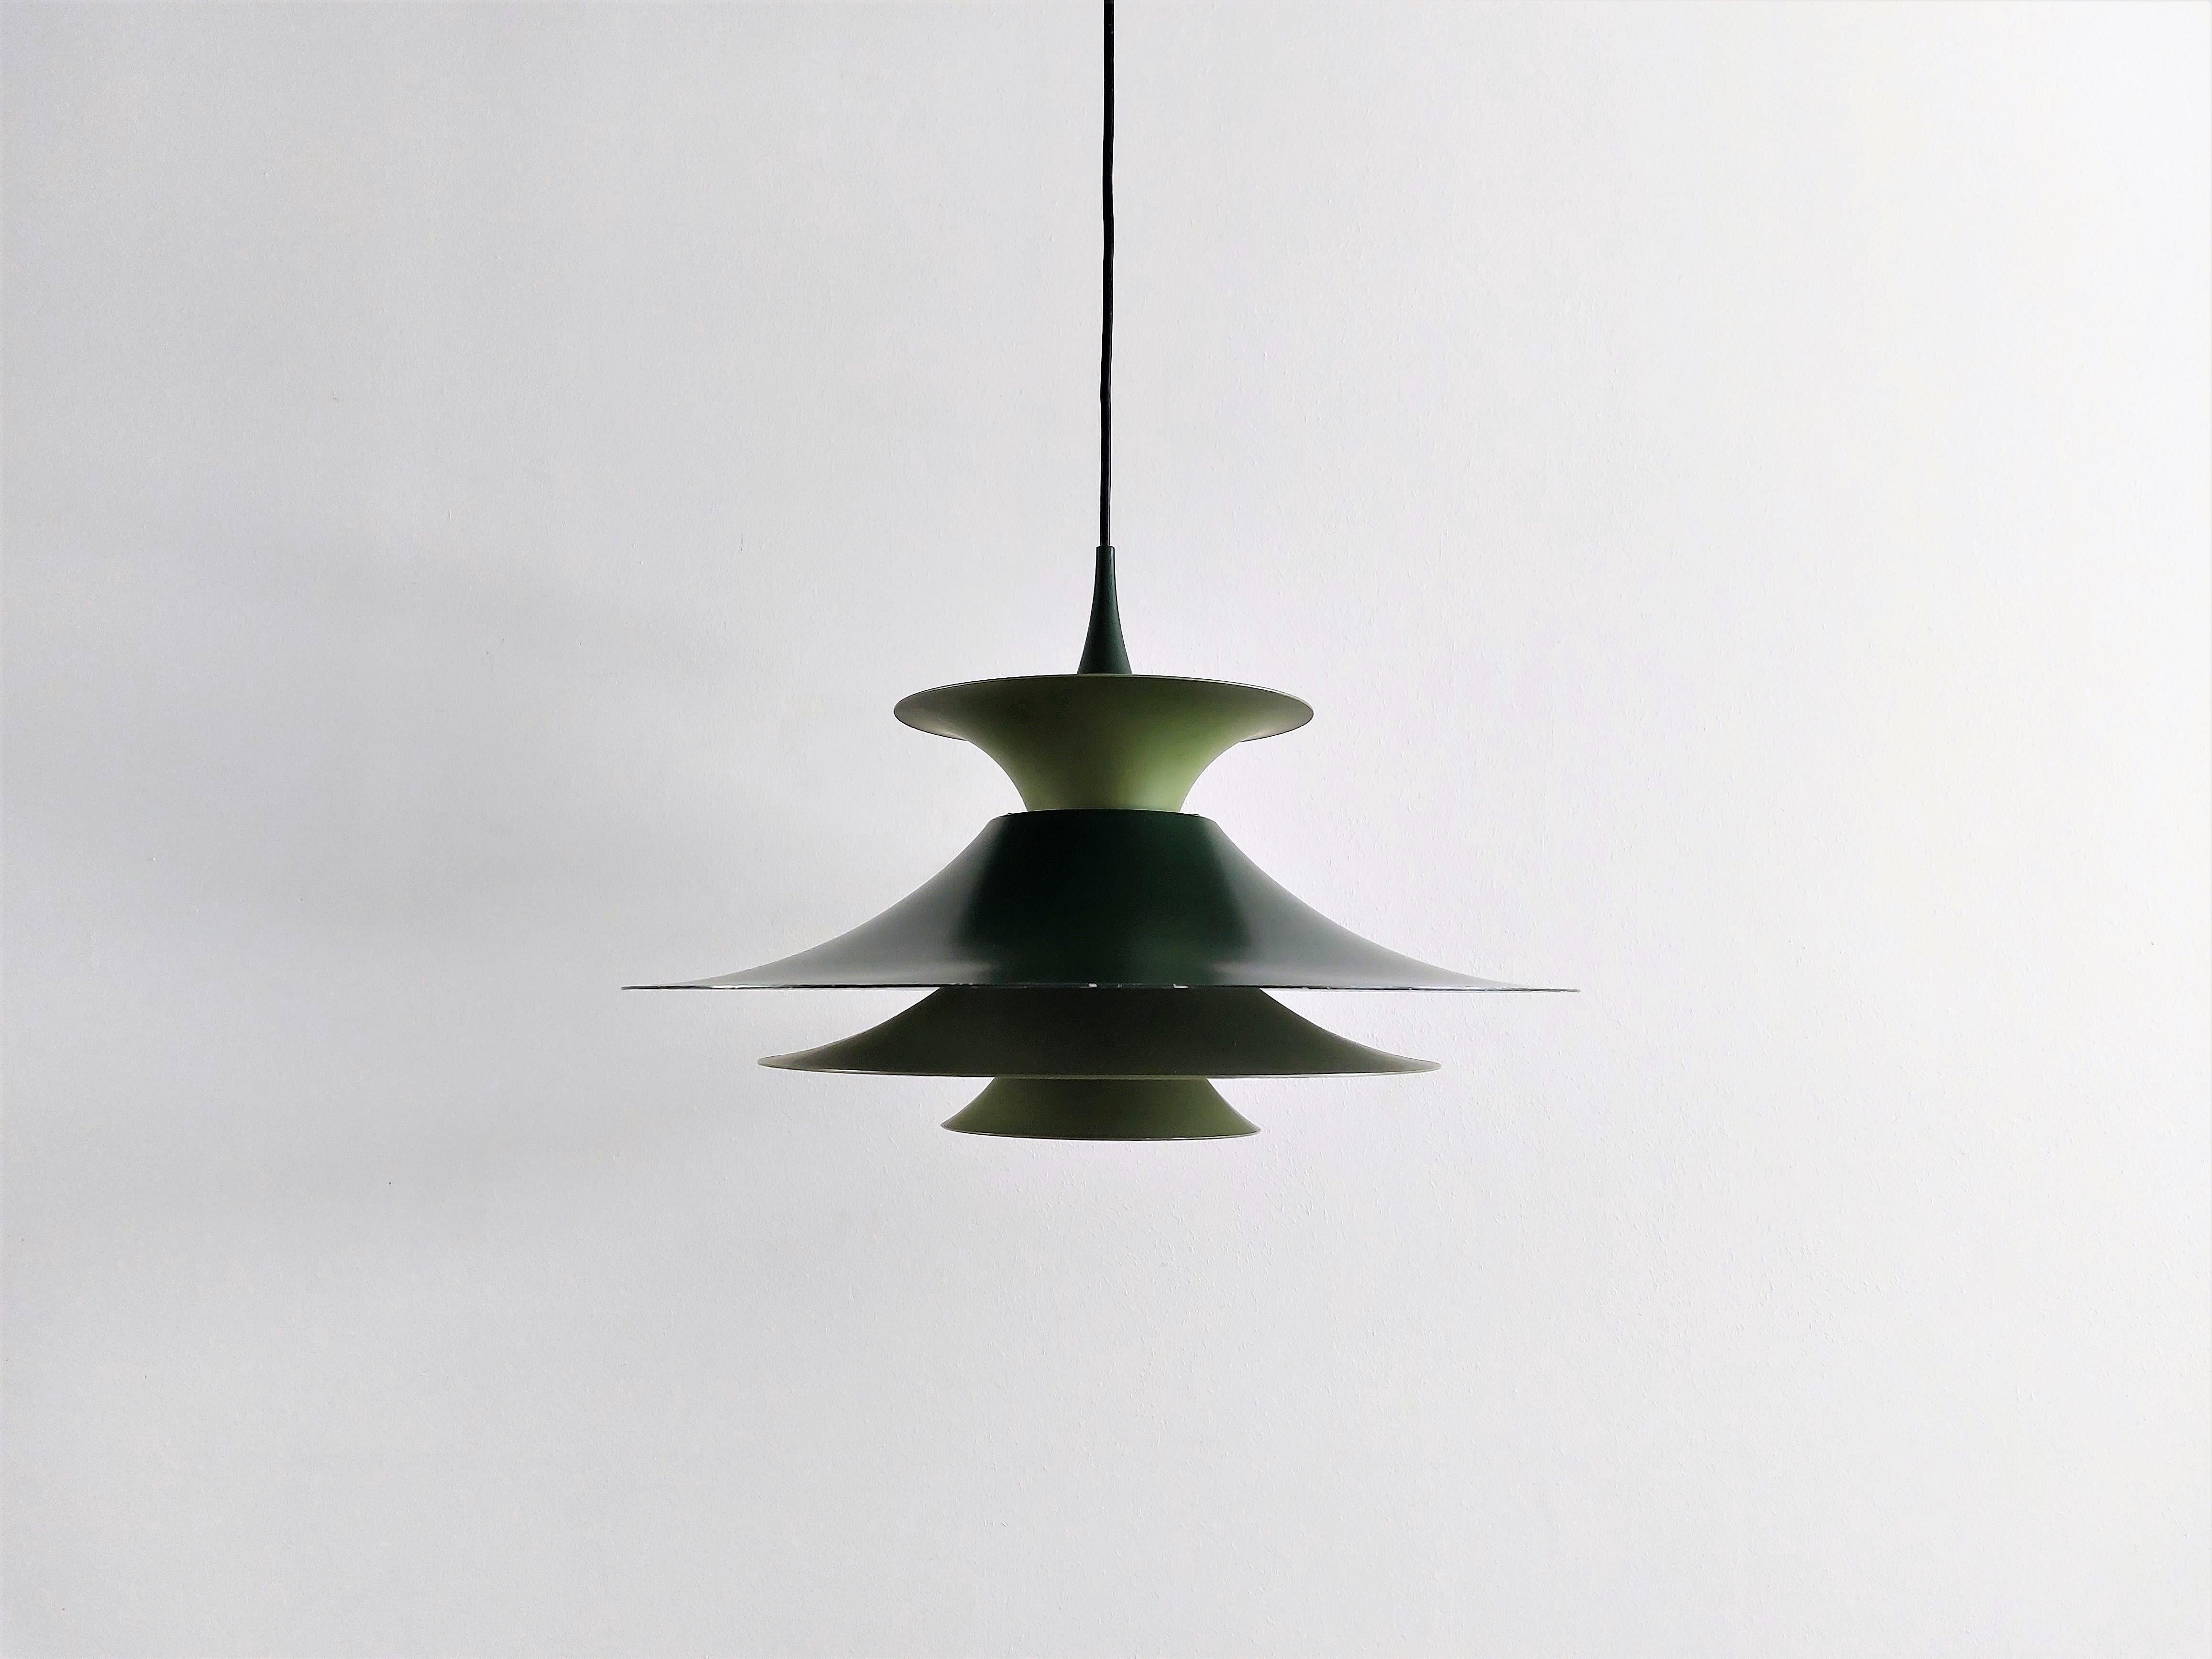 This pendant lamp was designed by Erik Balslev for Fog & Mørup in Denmark in the 1970's. The Radius I is the ø 47 cm version of the Radius lights. The pendant has dark and light green coloured parts, that gives it a fresh and playful look. The